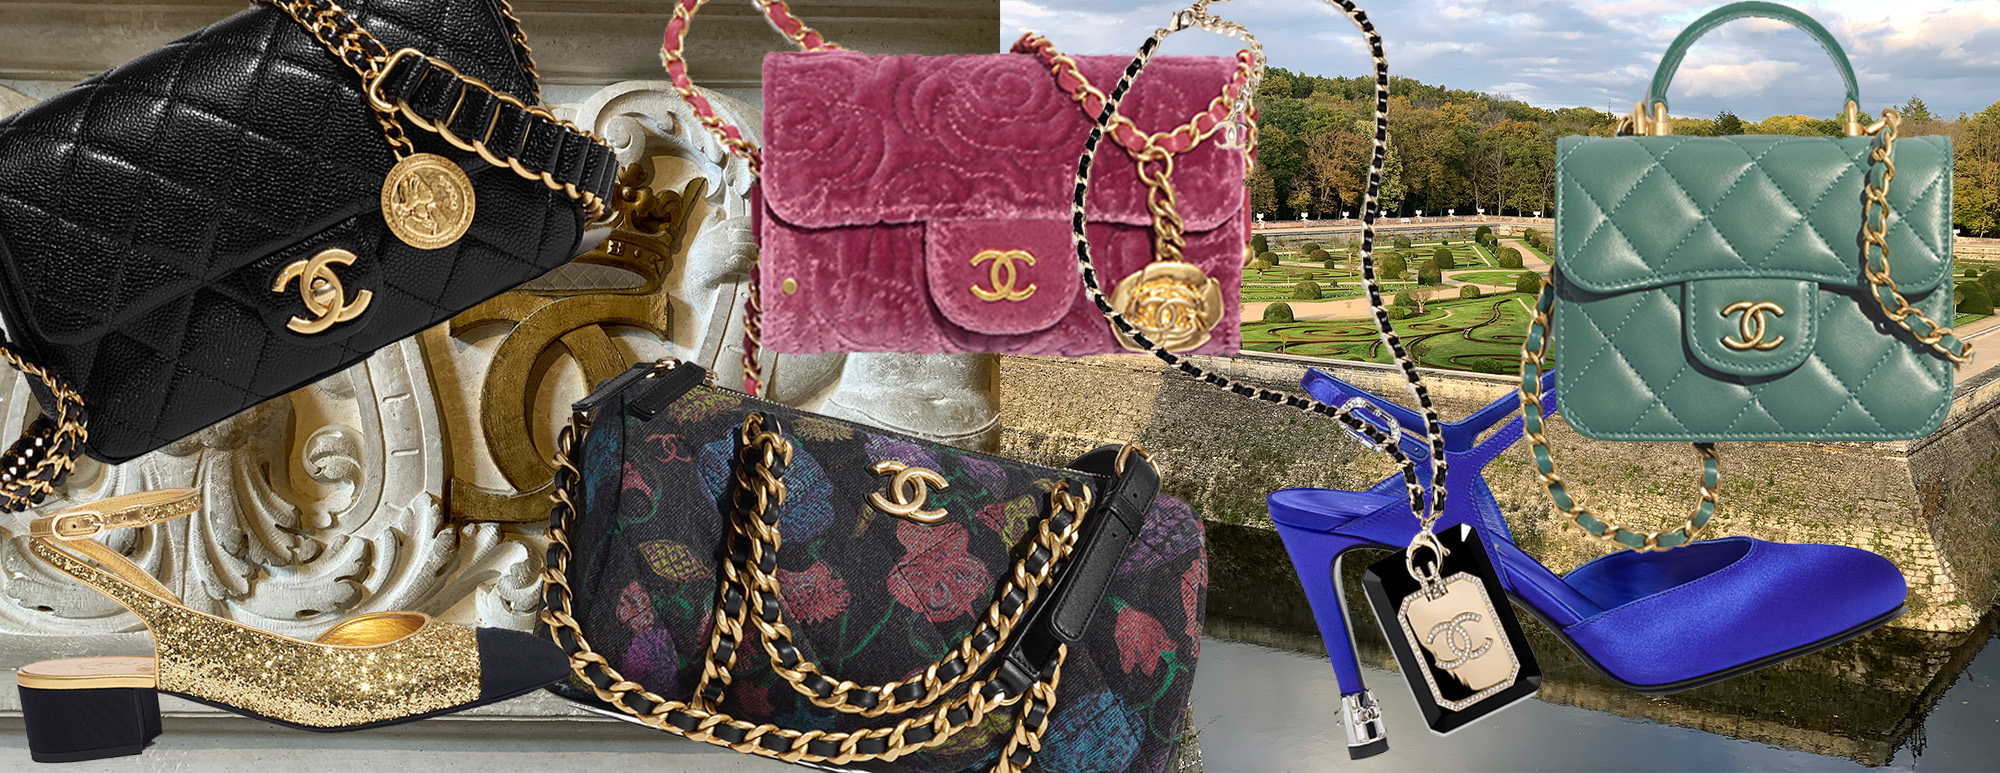 All the CHANEL 2020/21 Métiers d'art accessories dropping end June